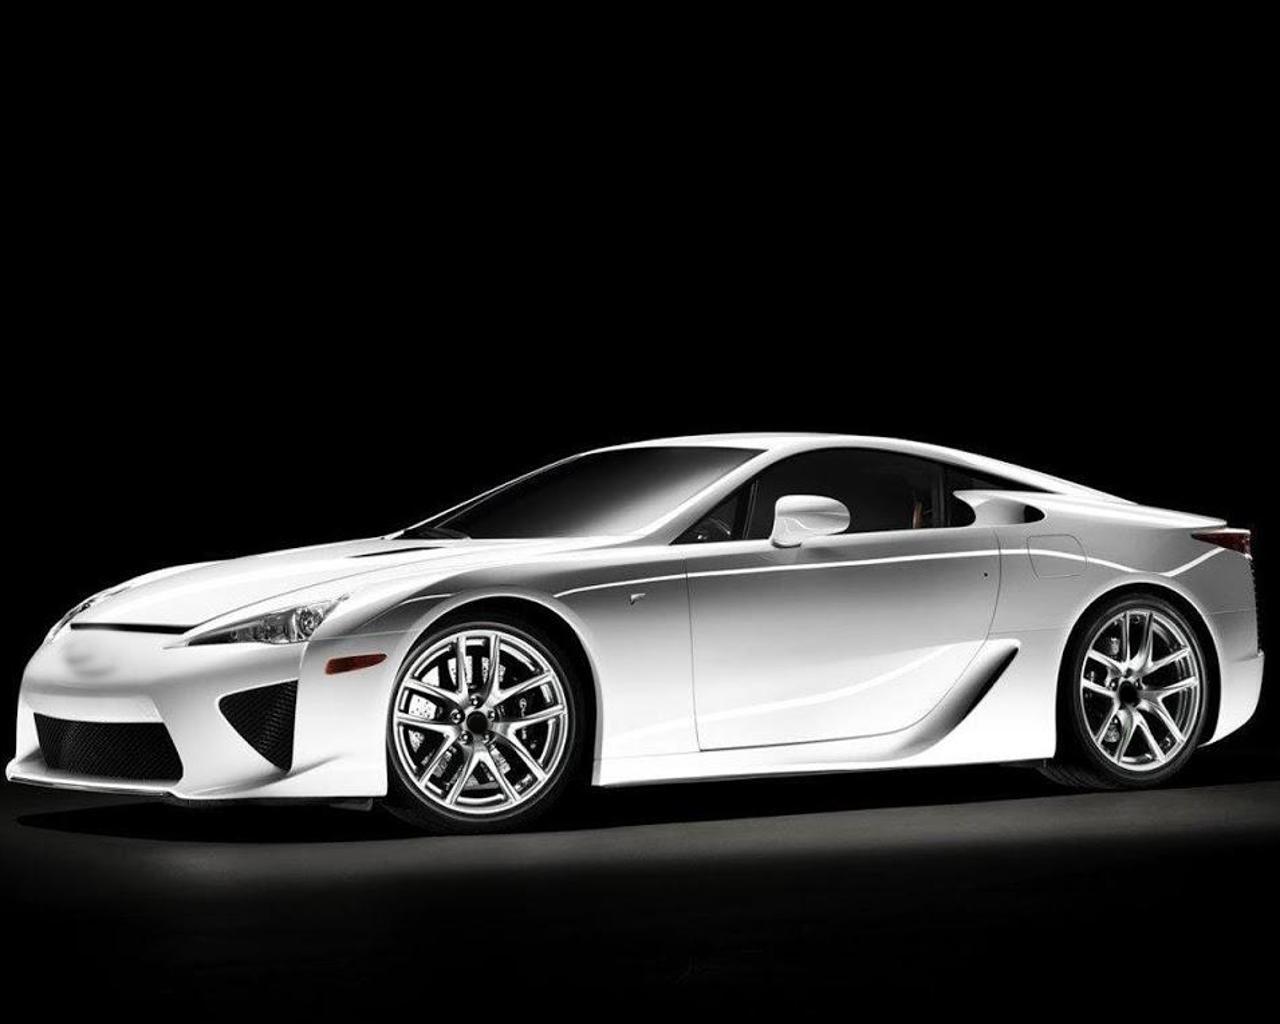 Wallpaper Of Lexus Lfa For Android Apk Download